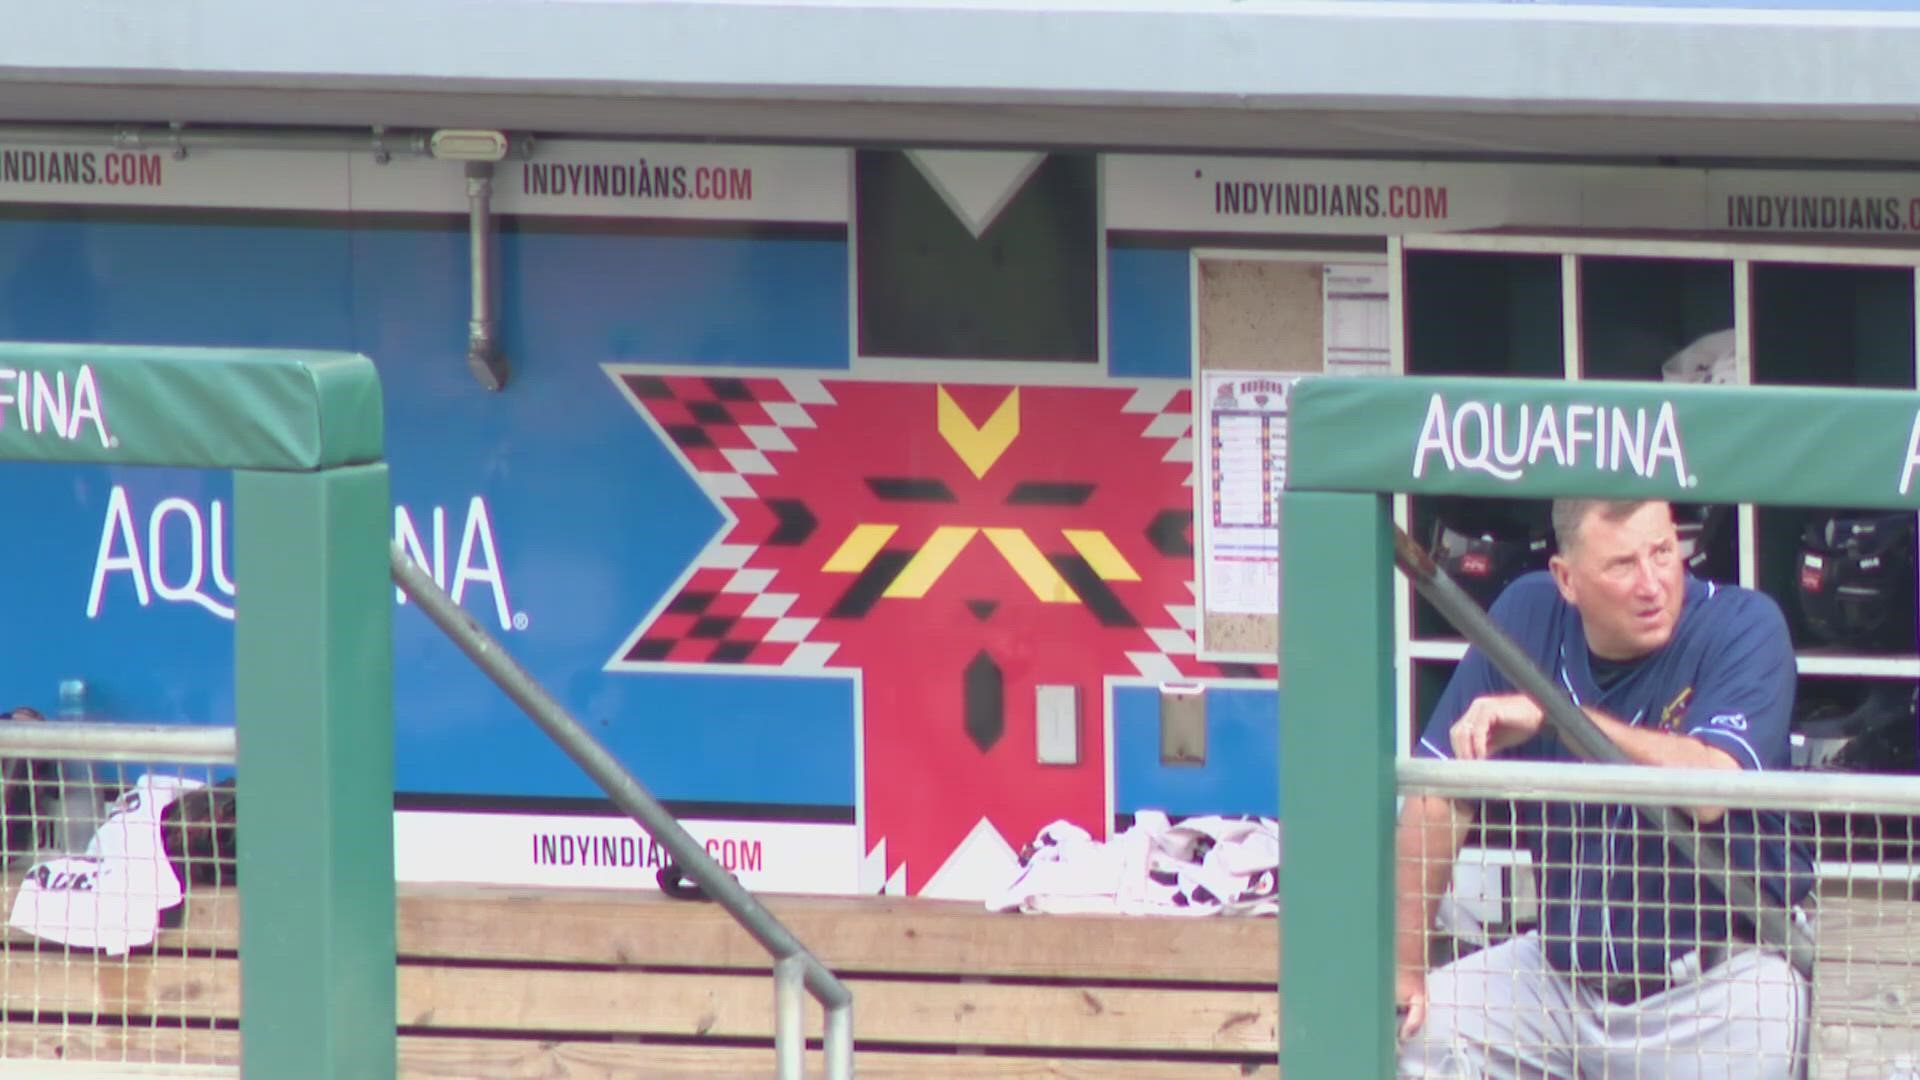 Karen Campbell talked with the team's CEO and chief of the Miami Nation of Indians in Indiana as they explained why they're defending the team's name.